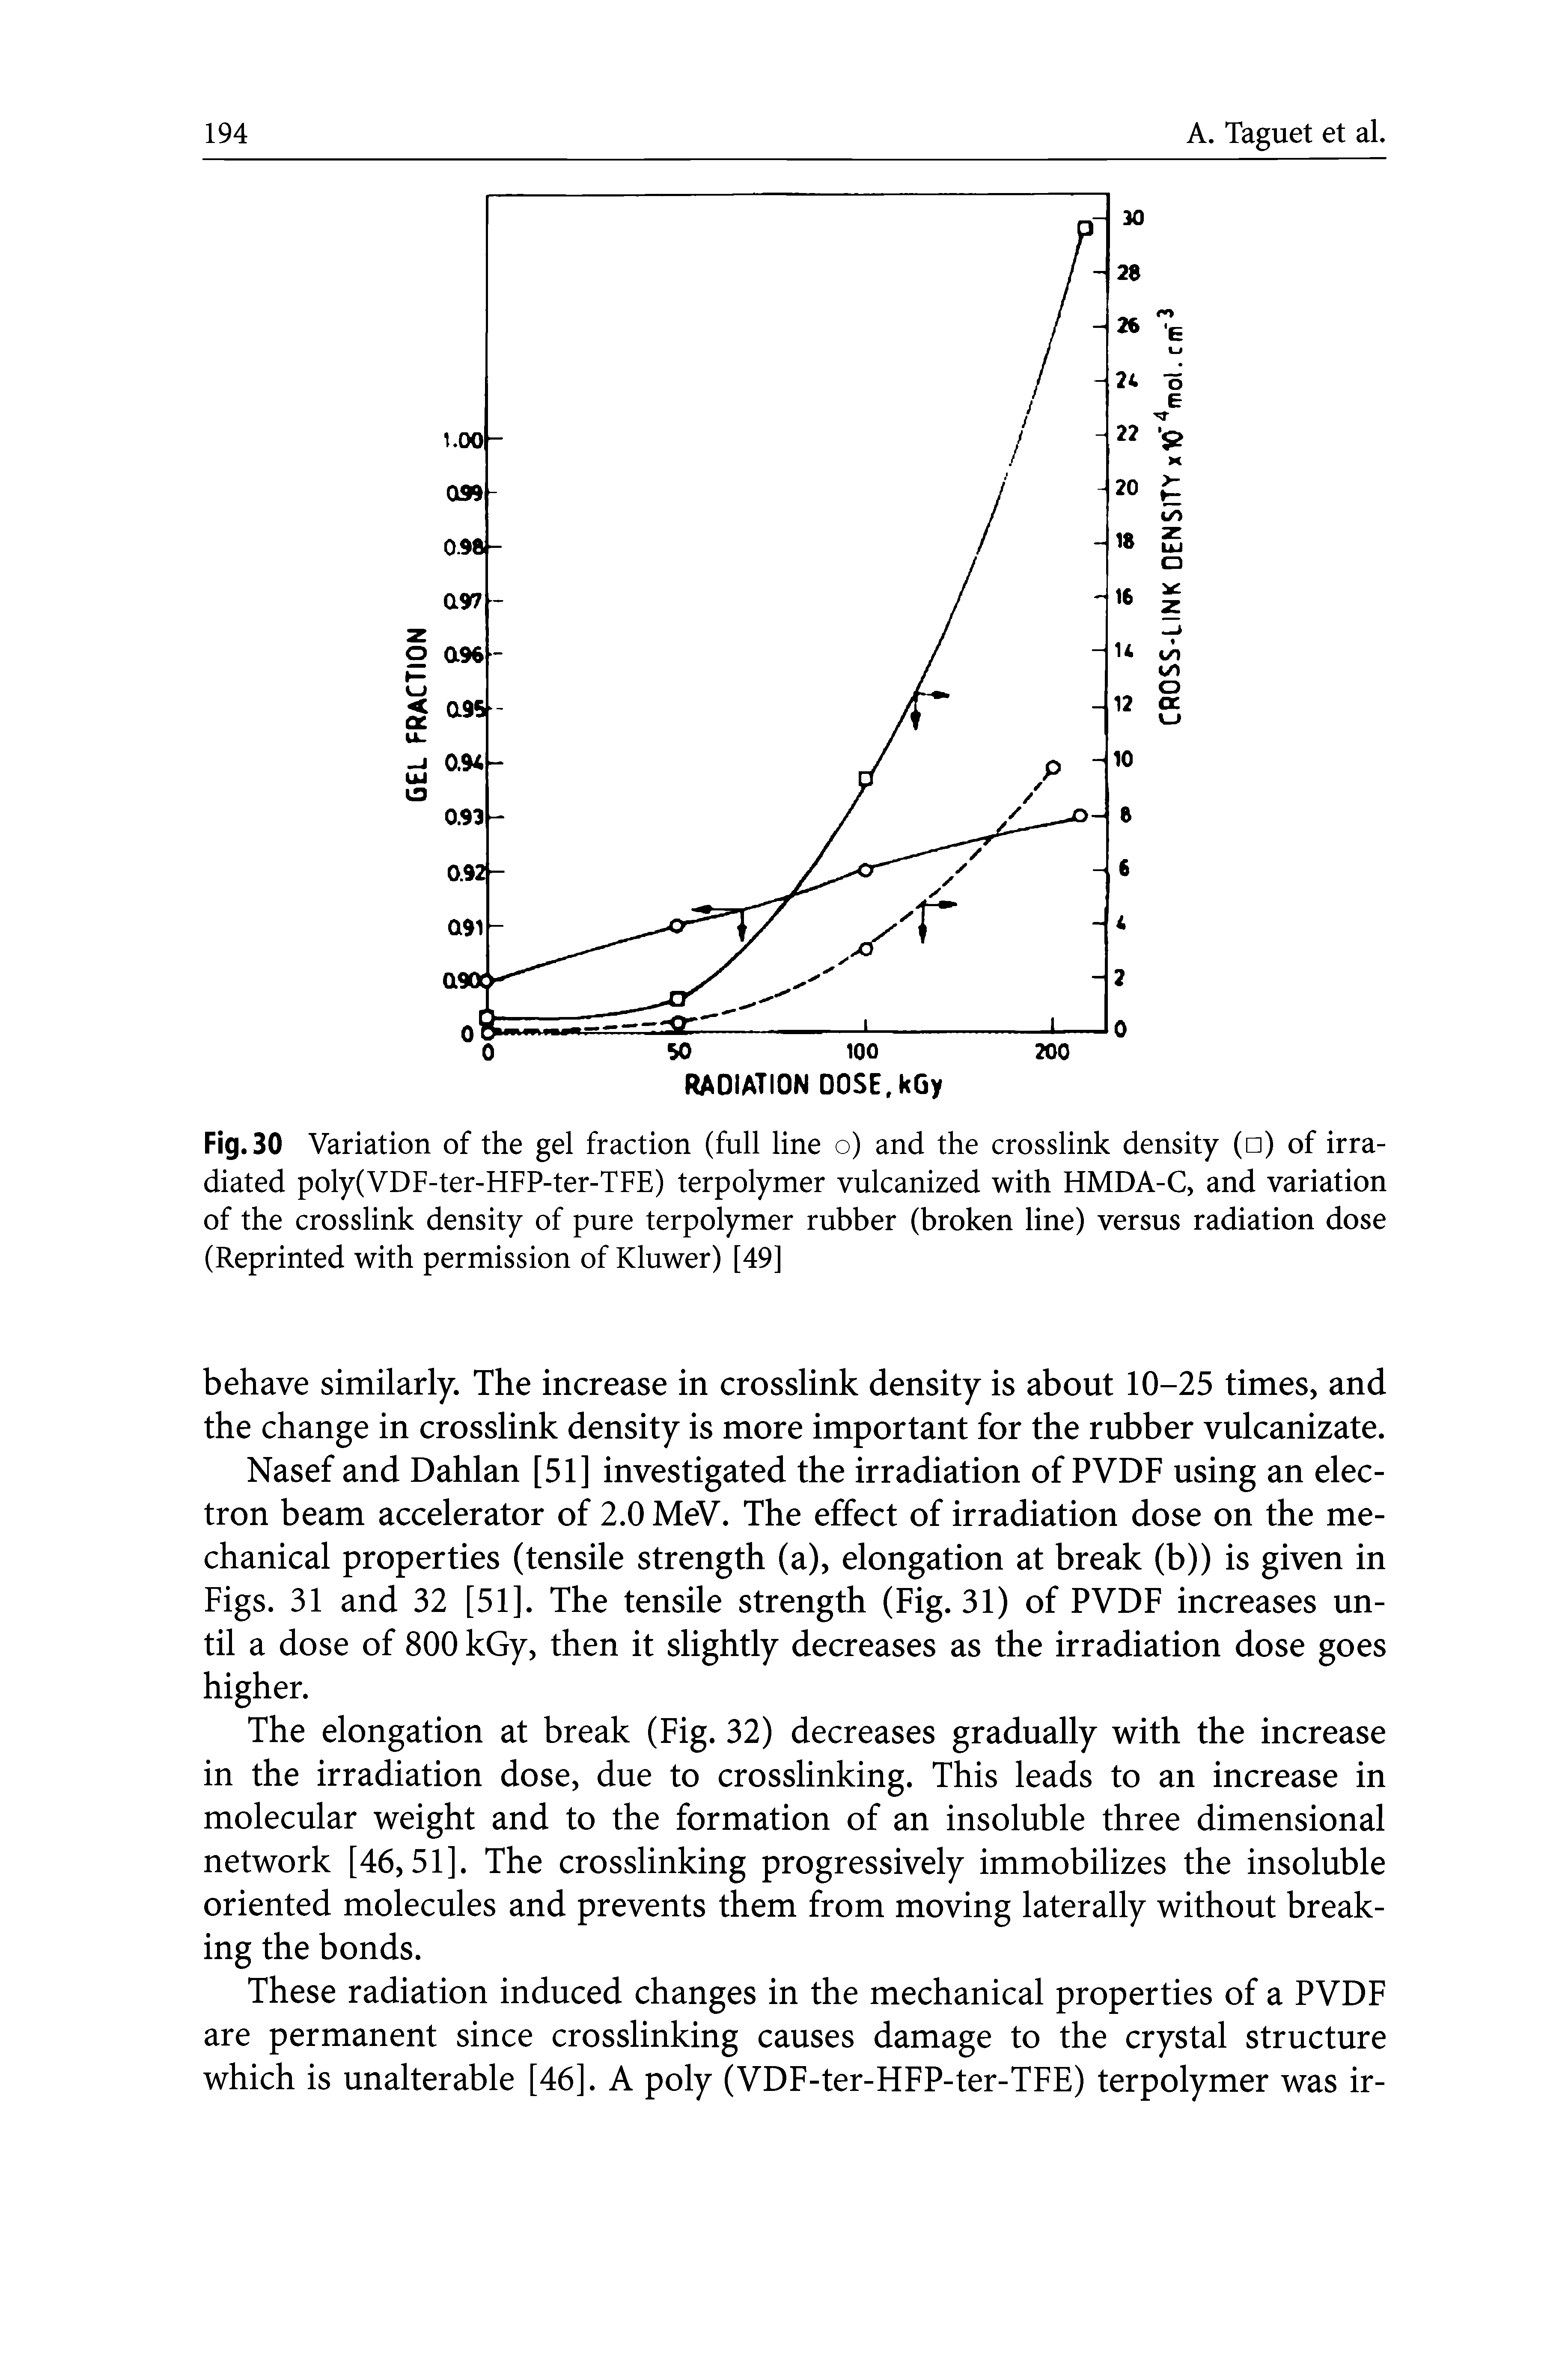 Fig. 30 Variation of the gel fraction (full line o) and the crosslink density ( ) of irradiated poly(VDF-ter-HFP-ter-TFE) terpolymer vulcanized with HMDA-C, and variation of the crosslink density of pure terpolymer rubber (broken line) versus radiation dose (Reprinted with permission of Kluwer) [49]...